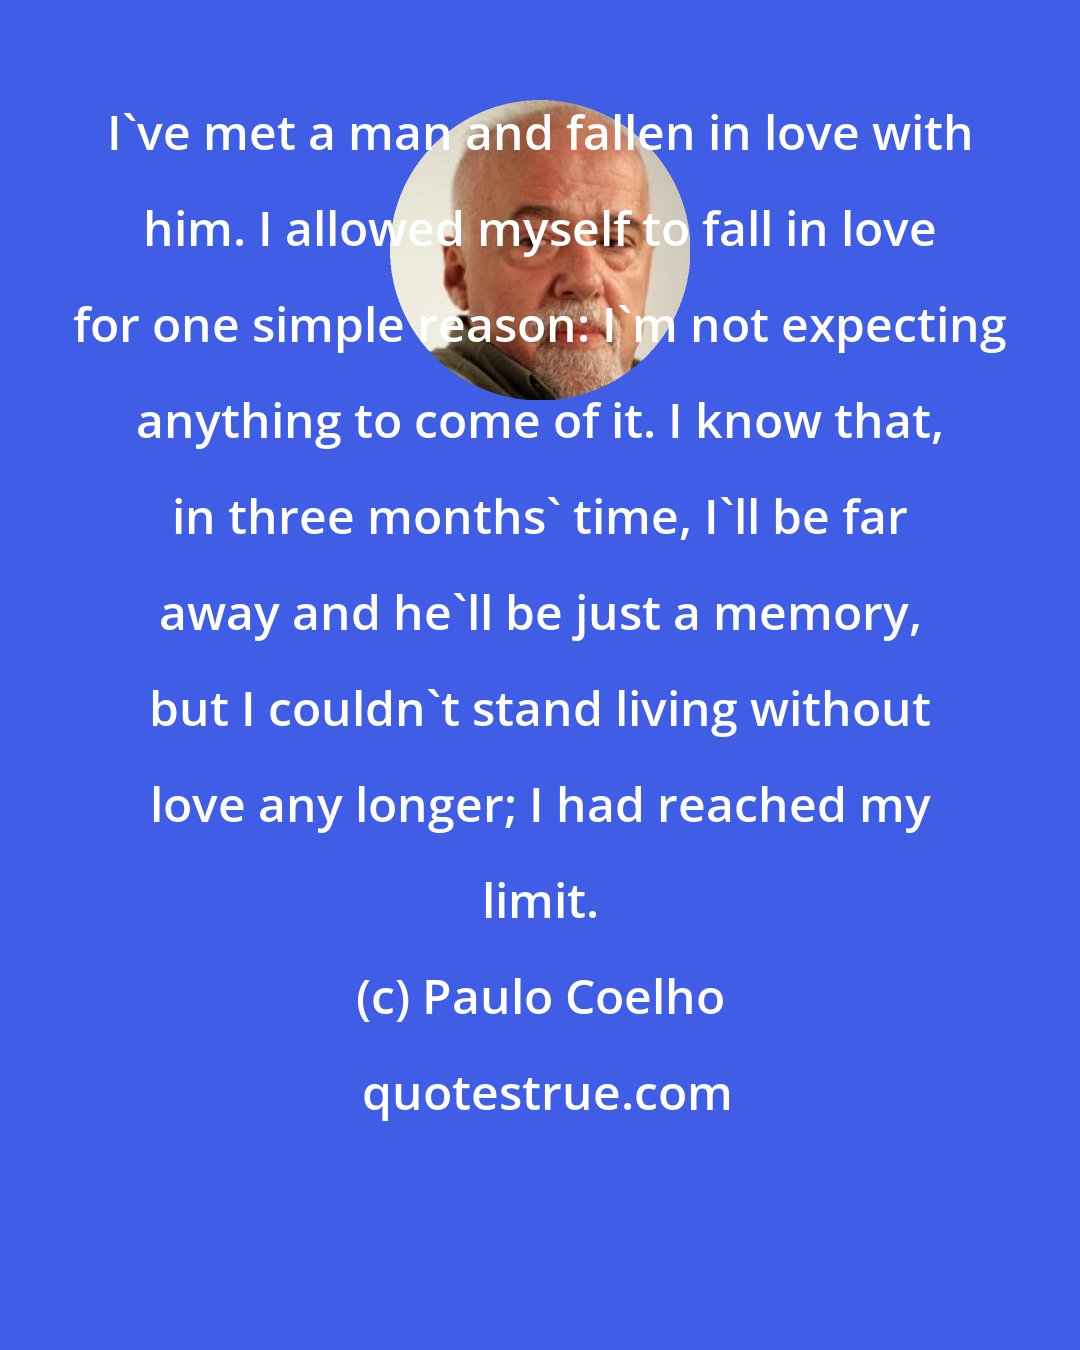 Paulo Coelho: I've met a man and fallen in love with him. I allowed myself to fall in love for one simple reason: I'm not expecting anything to come of it. I know that, in three months' time, I'll be far away and he'll be just a memory, but I couldn't stand living without love any longer; I had reached my limit.